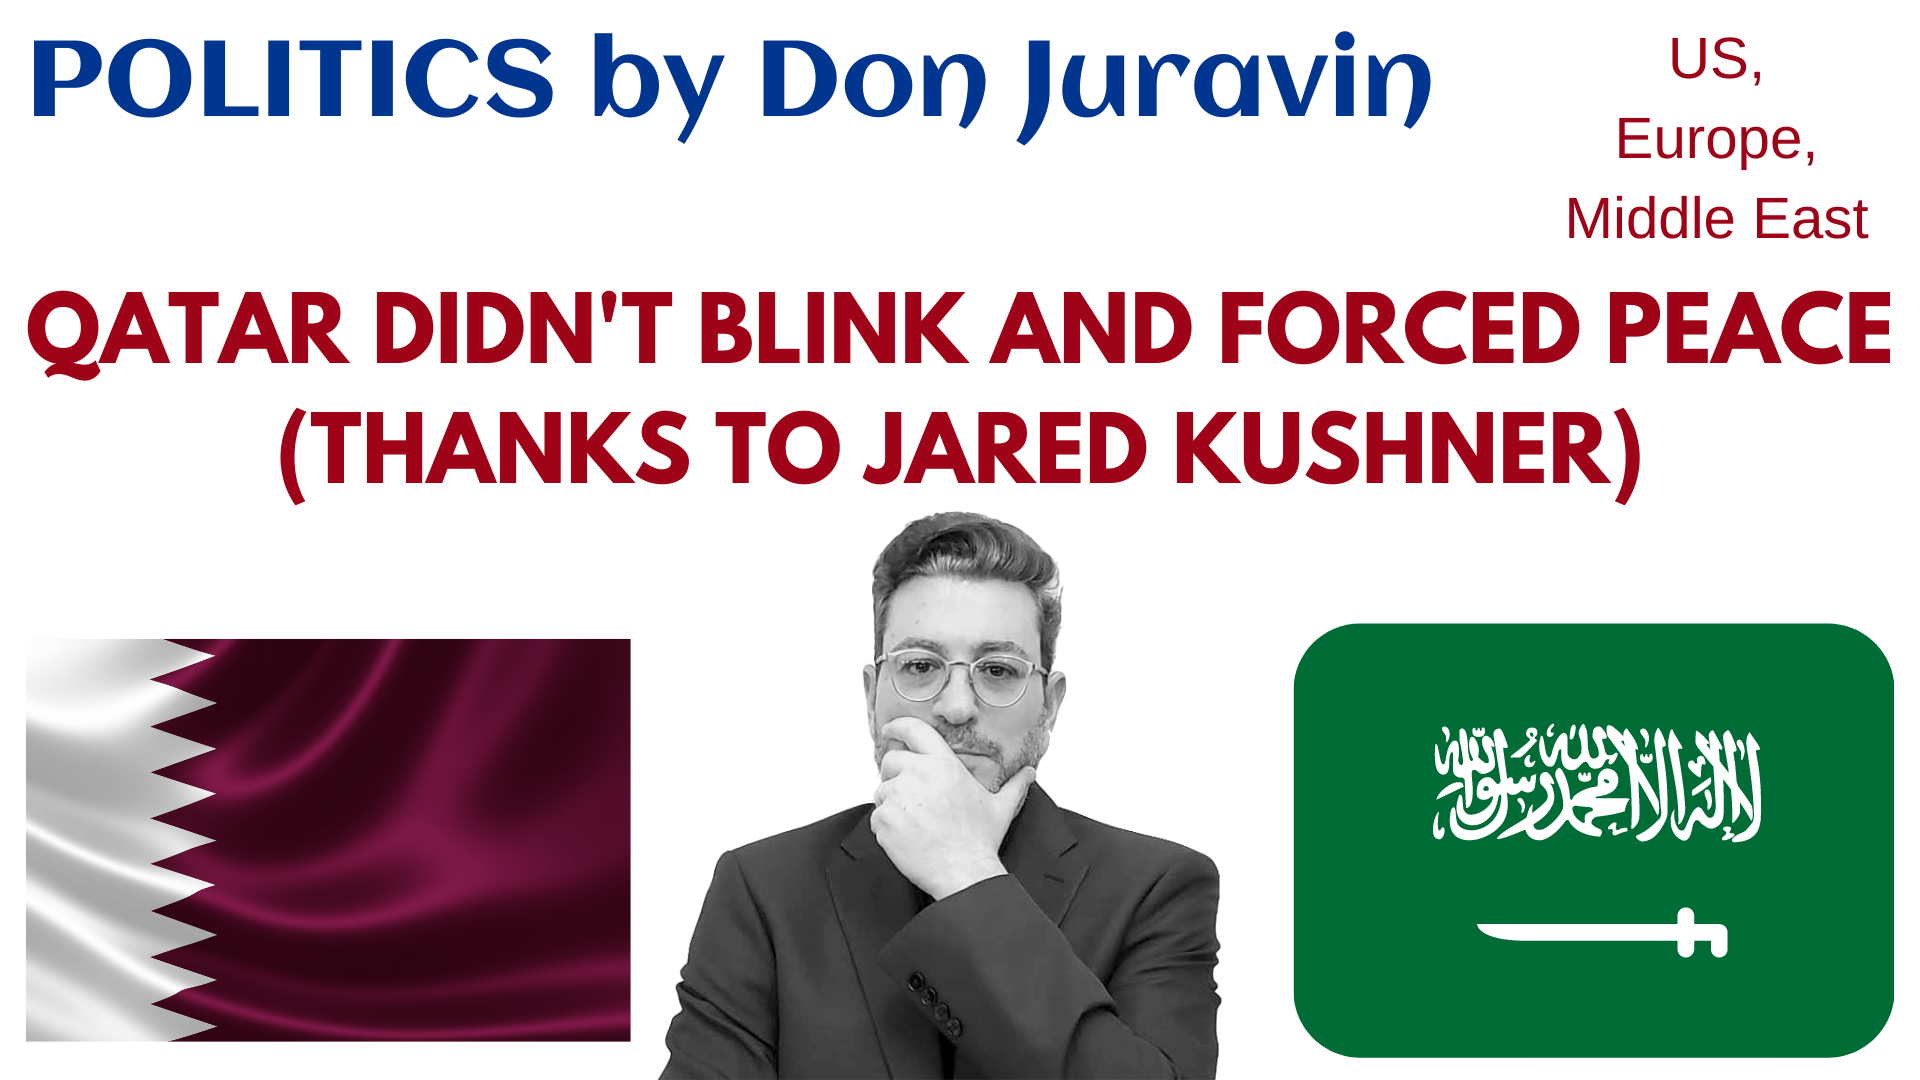 QATAR DIDN'T BLINK AND FORCED PEACE (THANKS TO JARED KUSHNER) SAYS DON JURAVIN